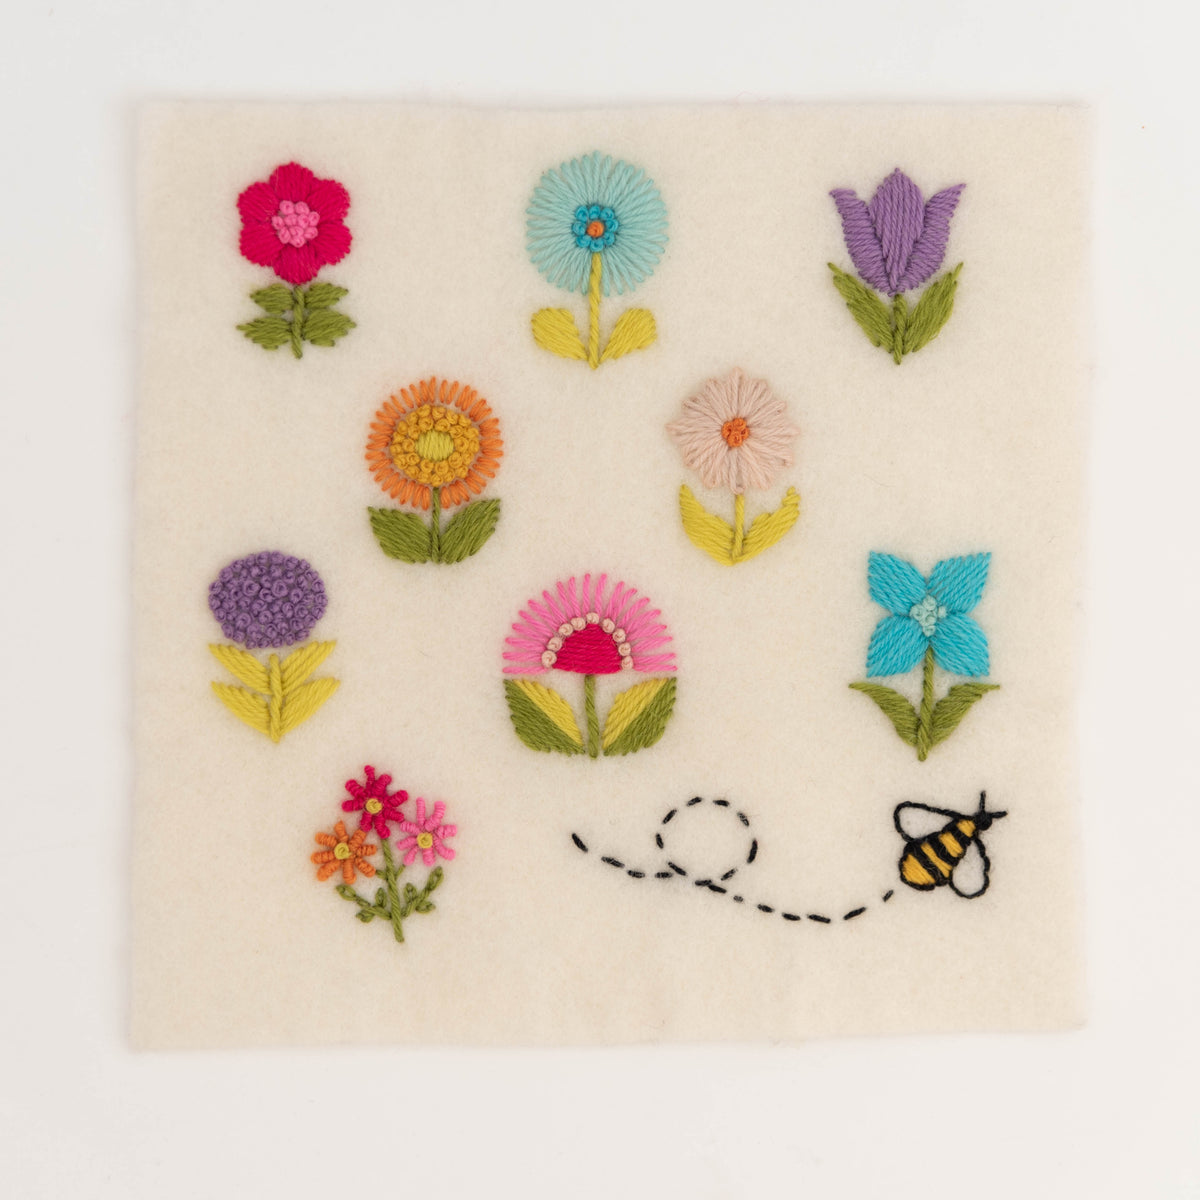 Mini Embroidery Templates Water Soluble 7 Small Templates 